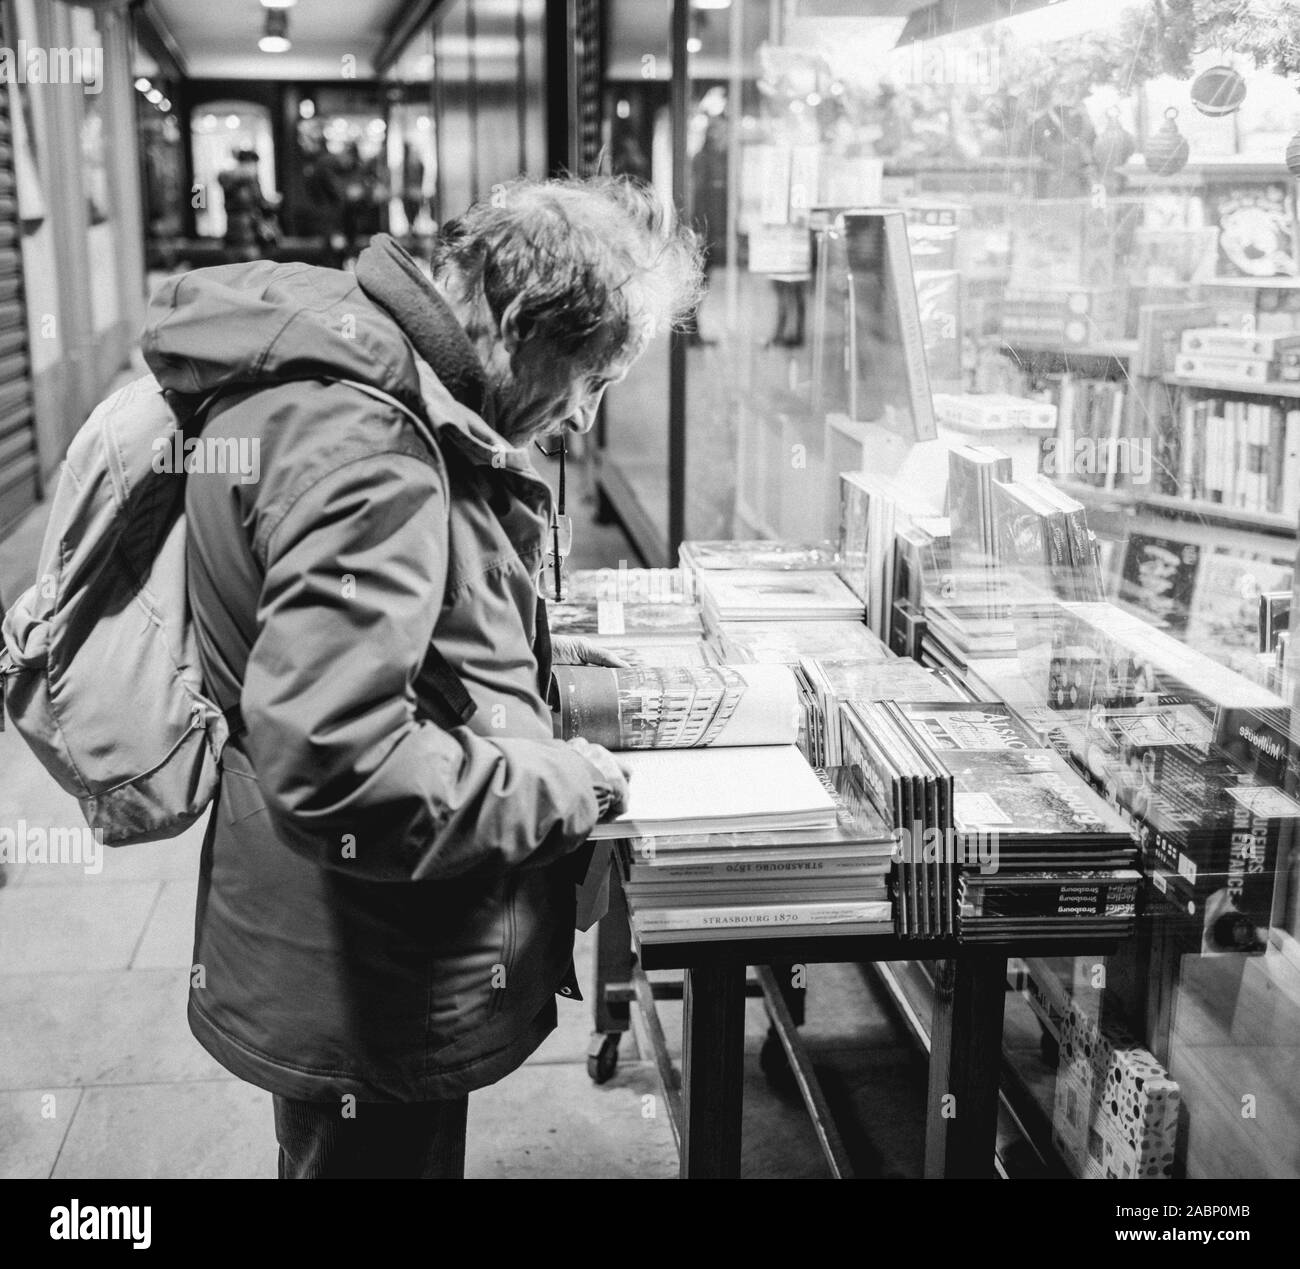 Strasbourg, France - Nov 23, 2017: Black and white Side view of mid-adult man reading a book on the outdoor shelves near the iconic Dinali library in Strasbourg Stock Photo